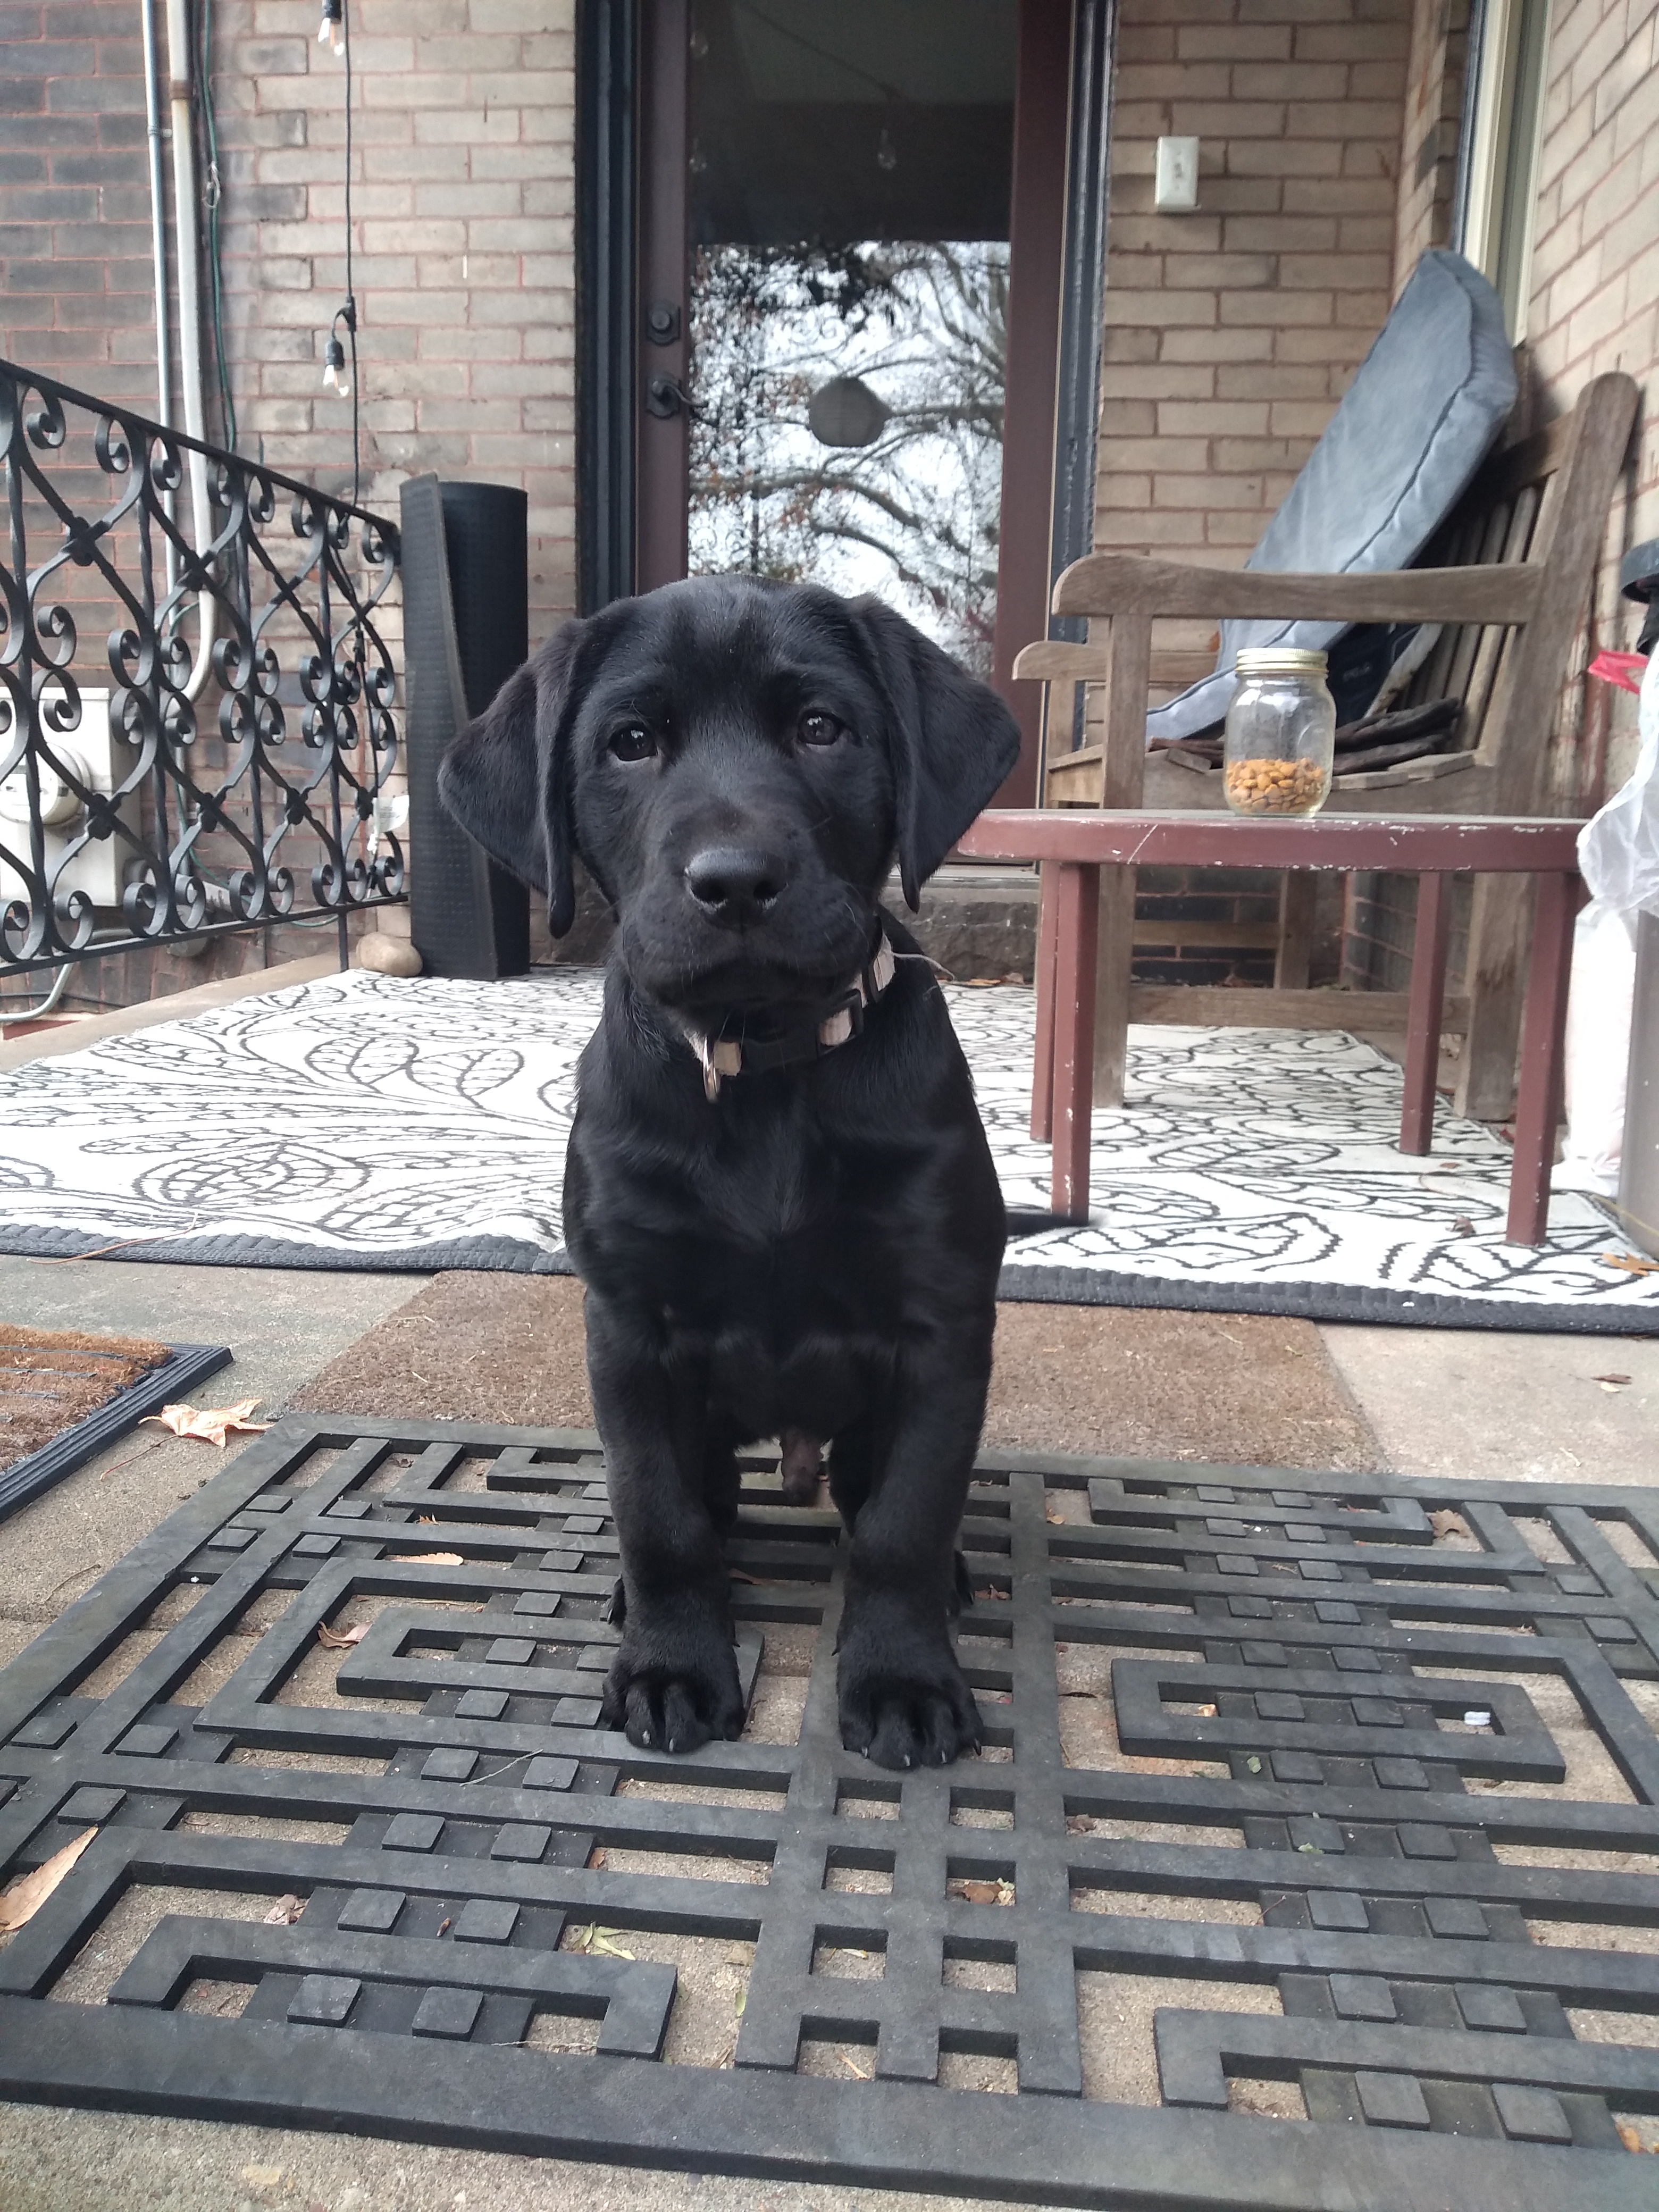 Black lab puppy training to be a working dog stands on on a porch